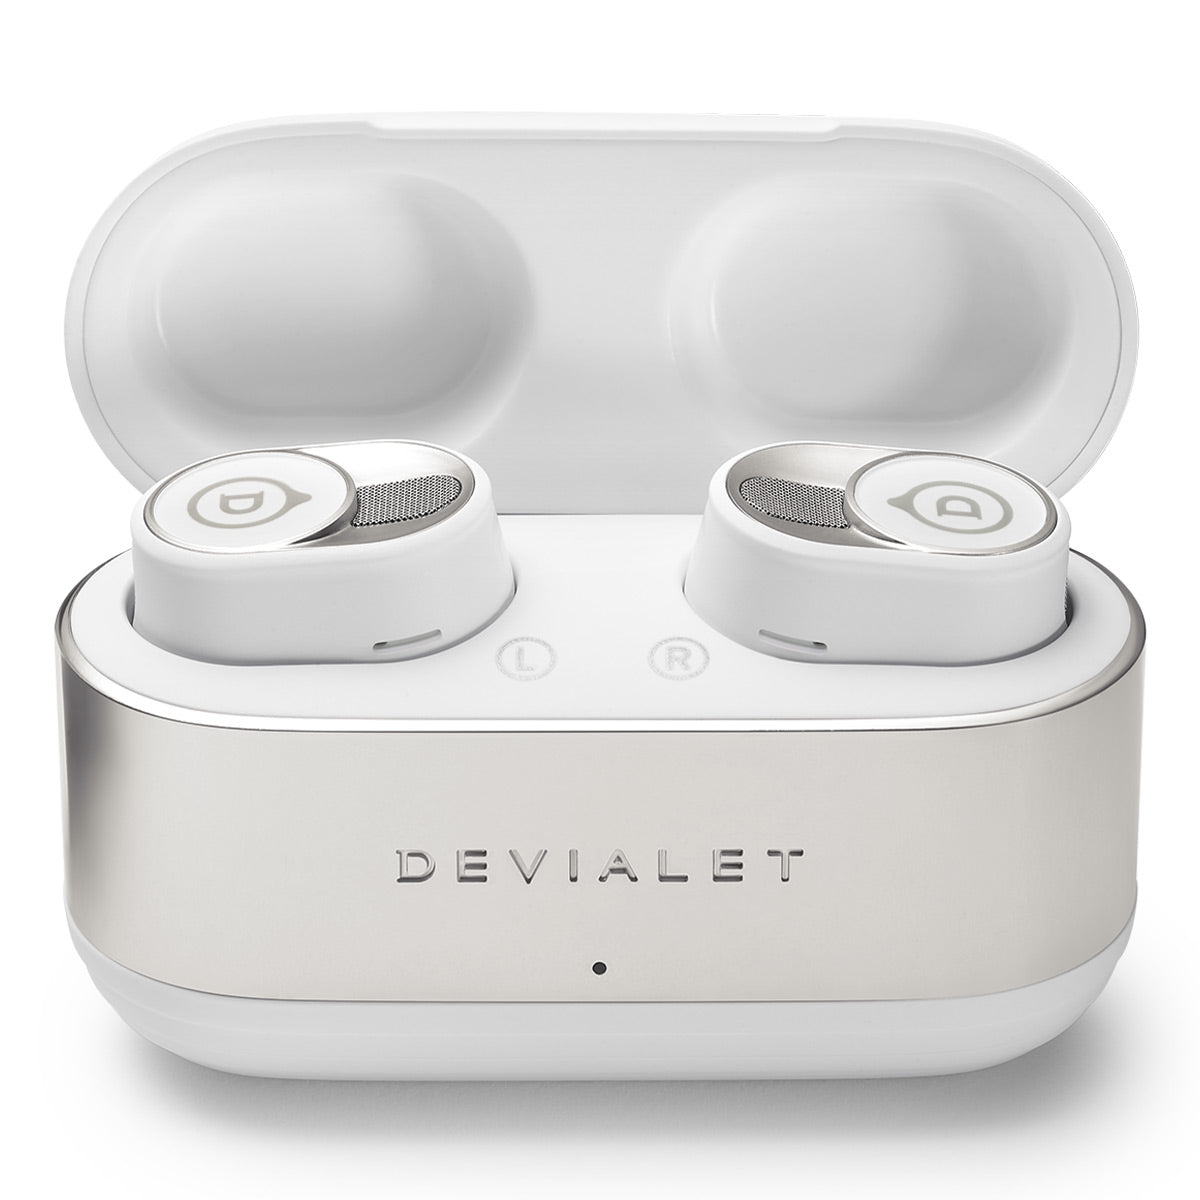 Devialet Gemini II True Wireless Bluetooth Earbuds with Adaptive Noise Cancellation and Water Resistance (Iconic White)